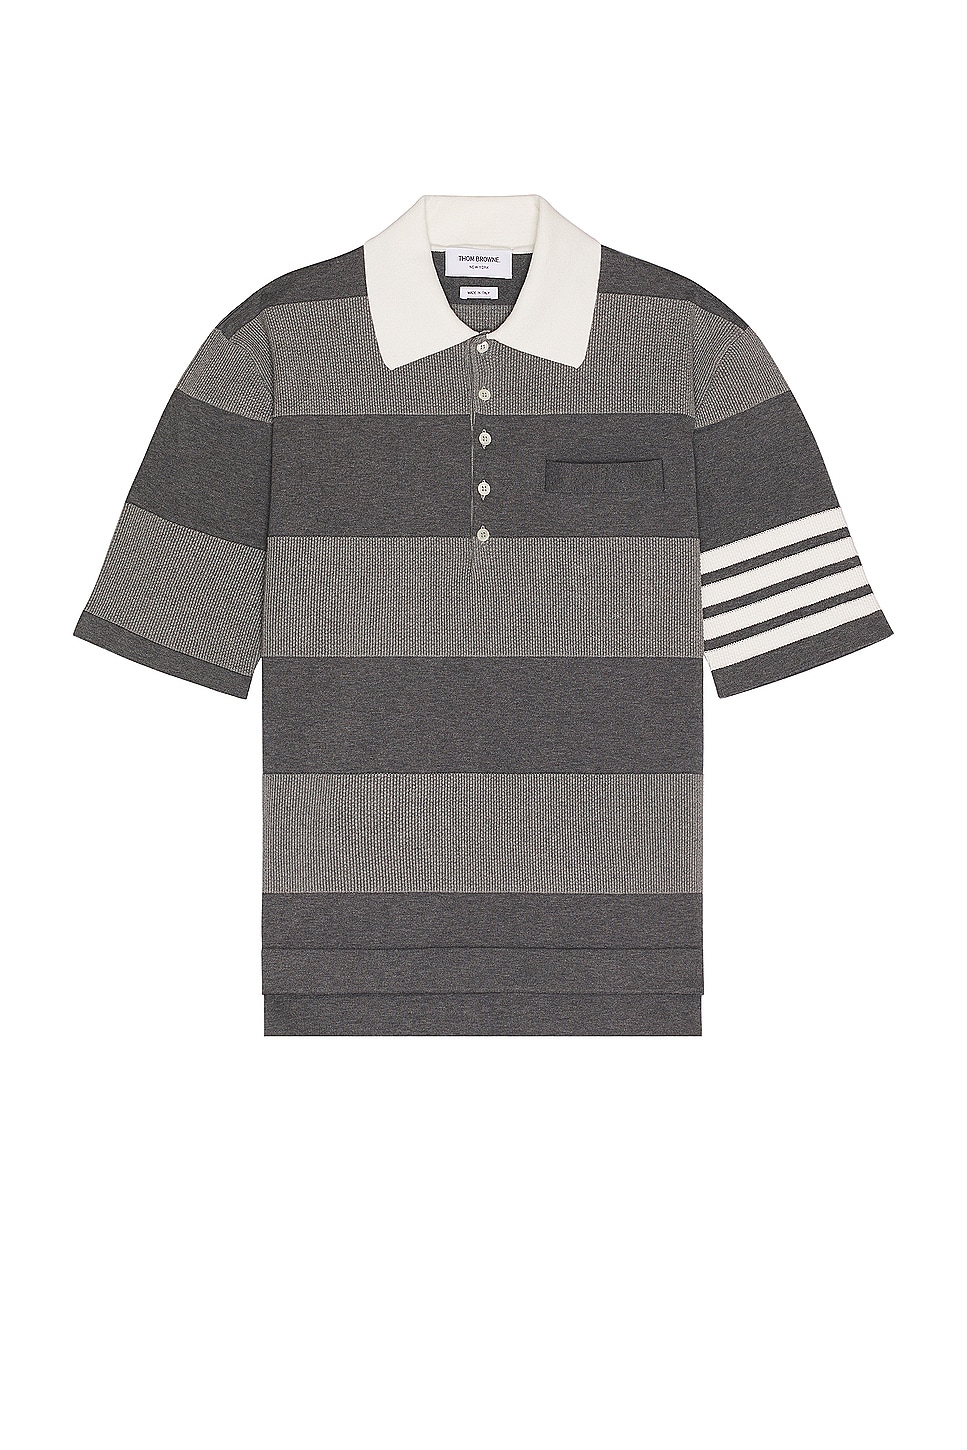 Image 1 of Thom Browne Rugby Short Sleeve Polo in Tonal Grey